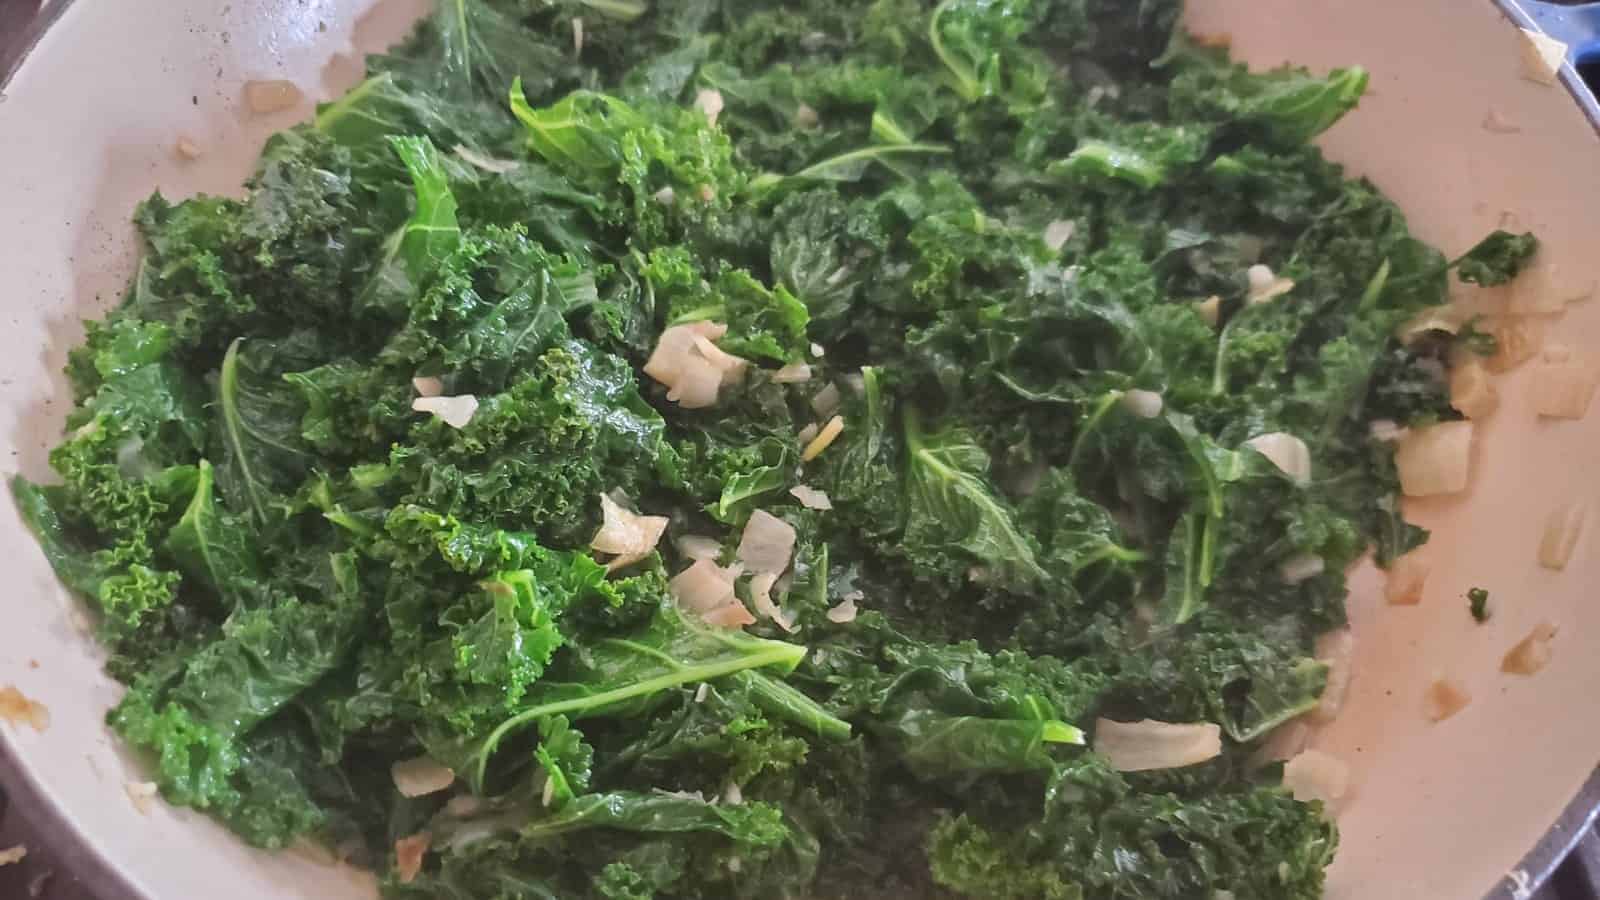 Garlic sesame kale in a pot just cooked and ready to eat.